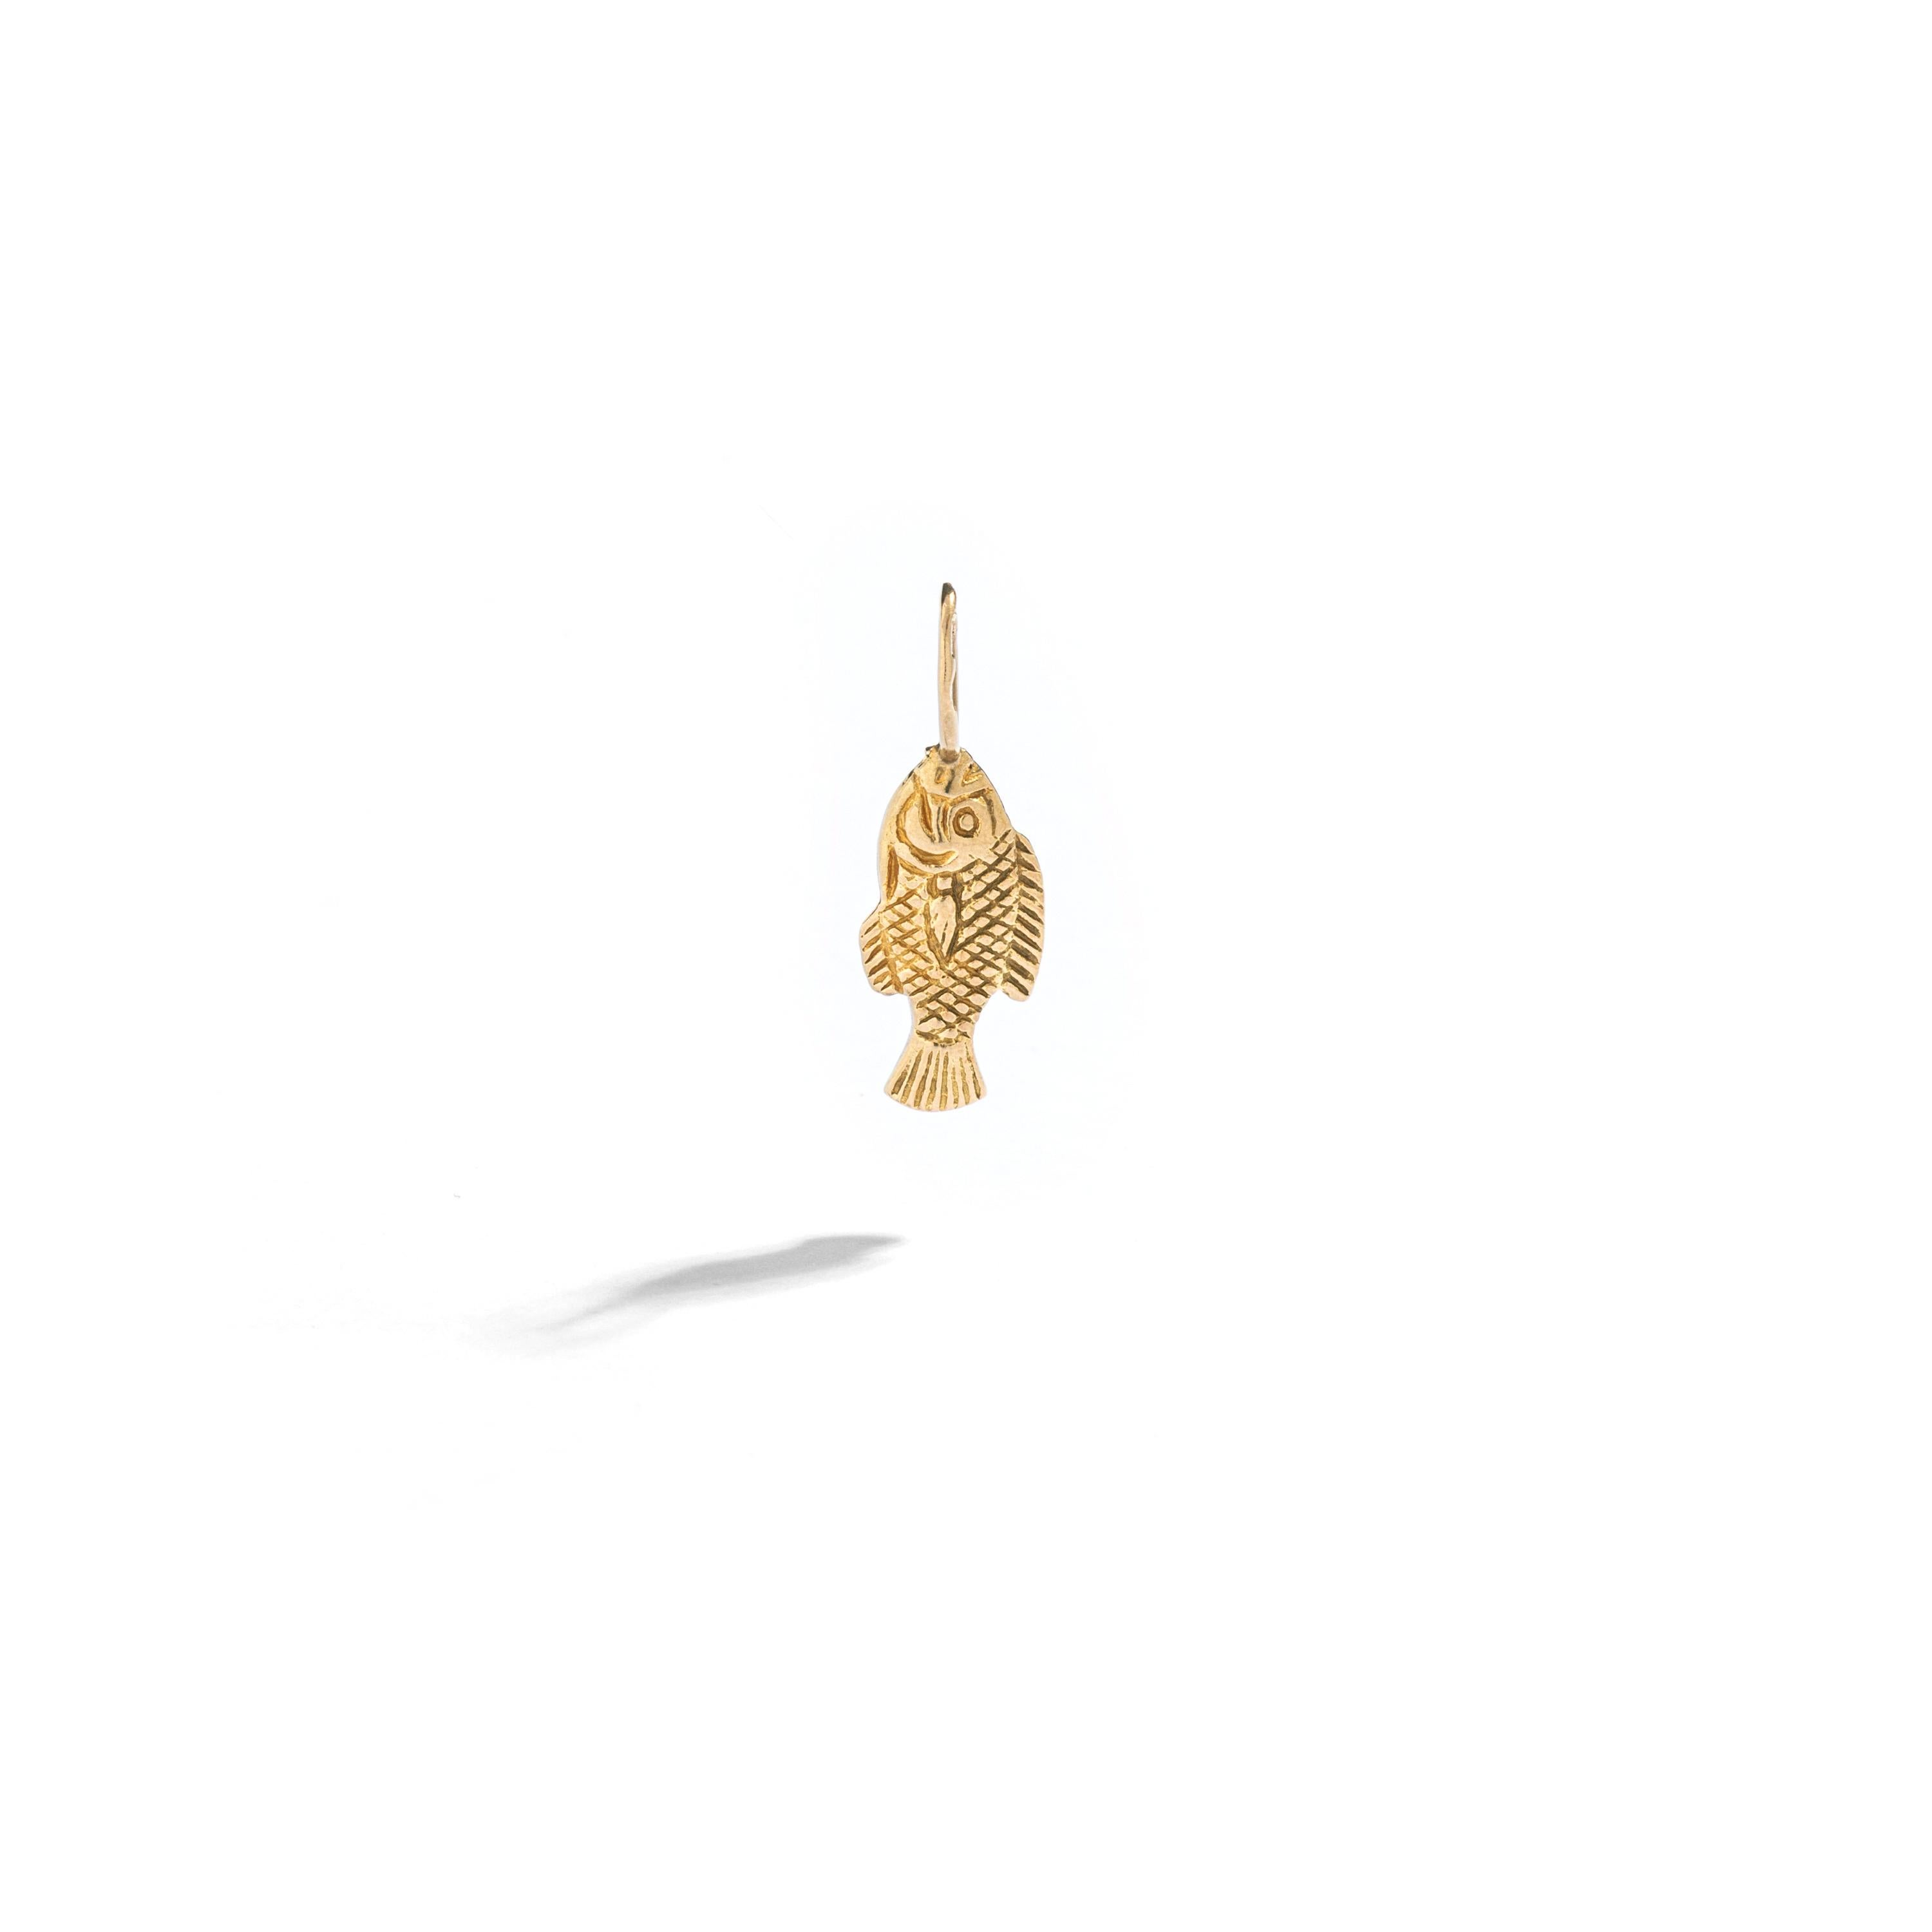 Fish Yellow Gold 18k Charm.
Egyptian revival.

Total length: 0.83 inch (2.10 centimeters) including bail.
Total weight: 1.71 grams.